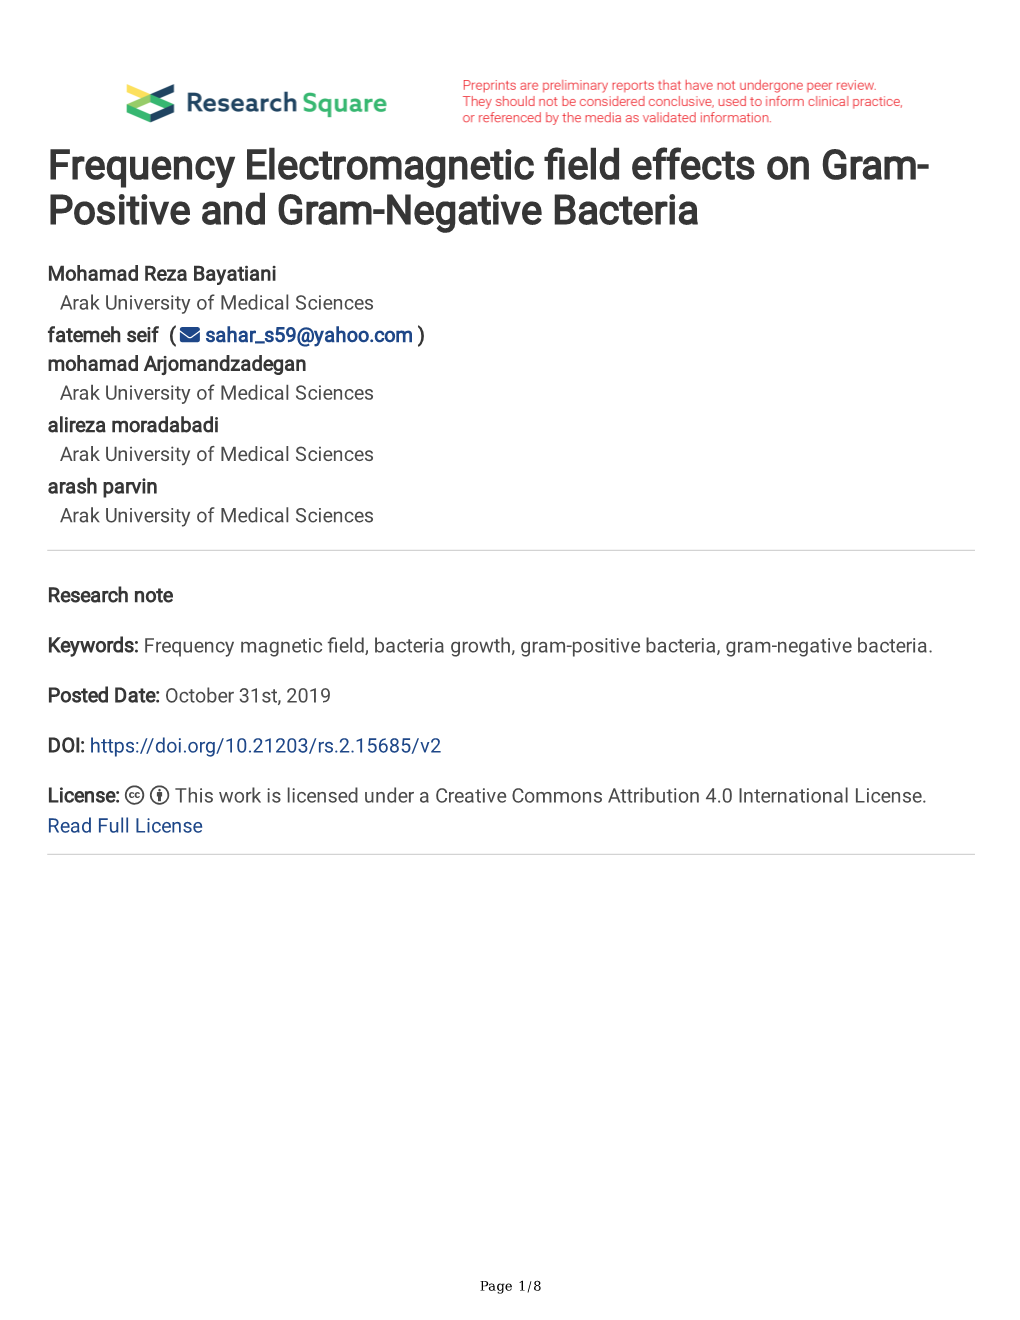 Frequency Electromagnetic Field Effects on Gram- Positive and Gram